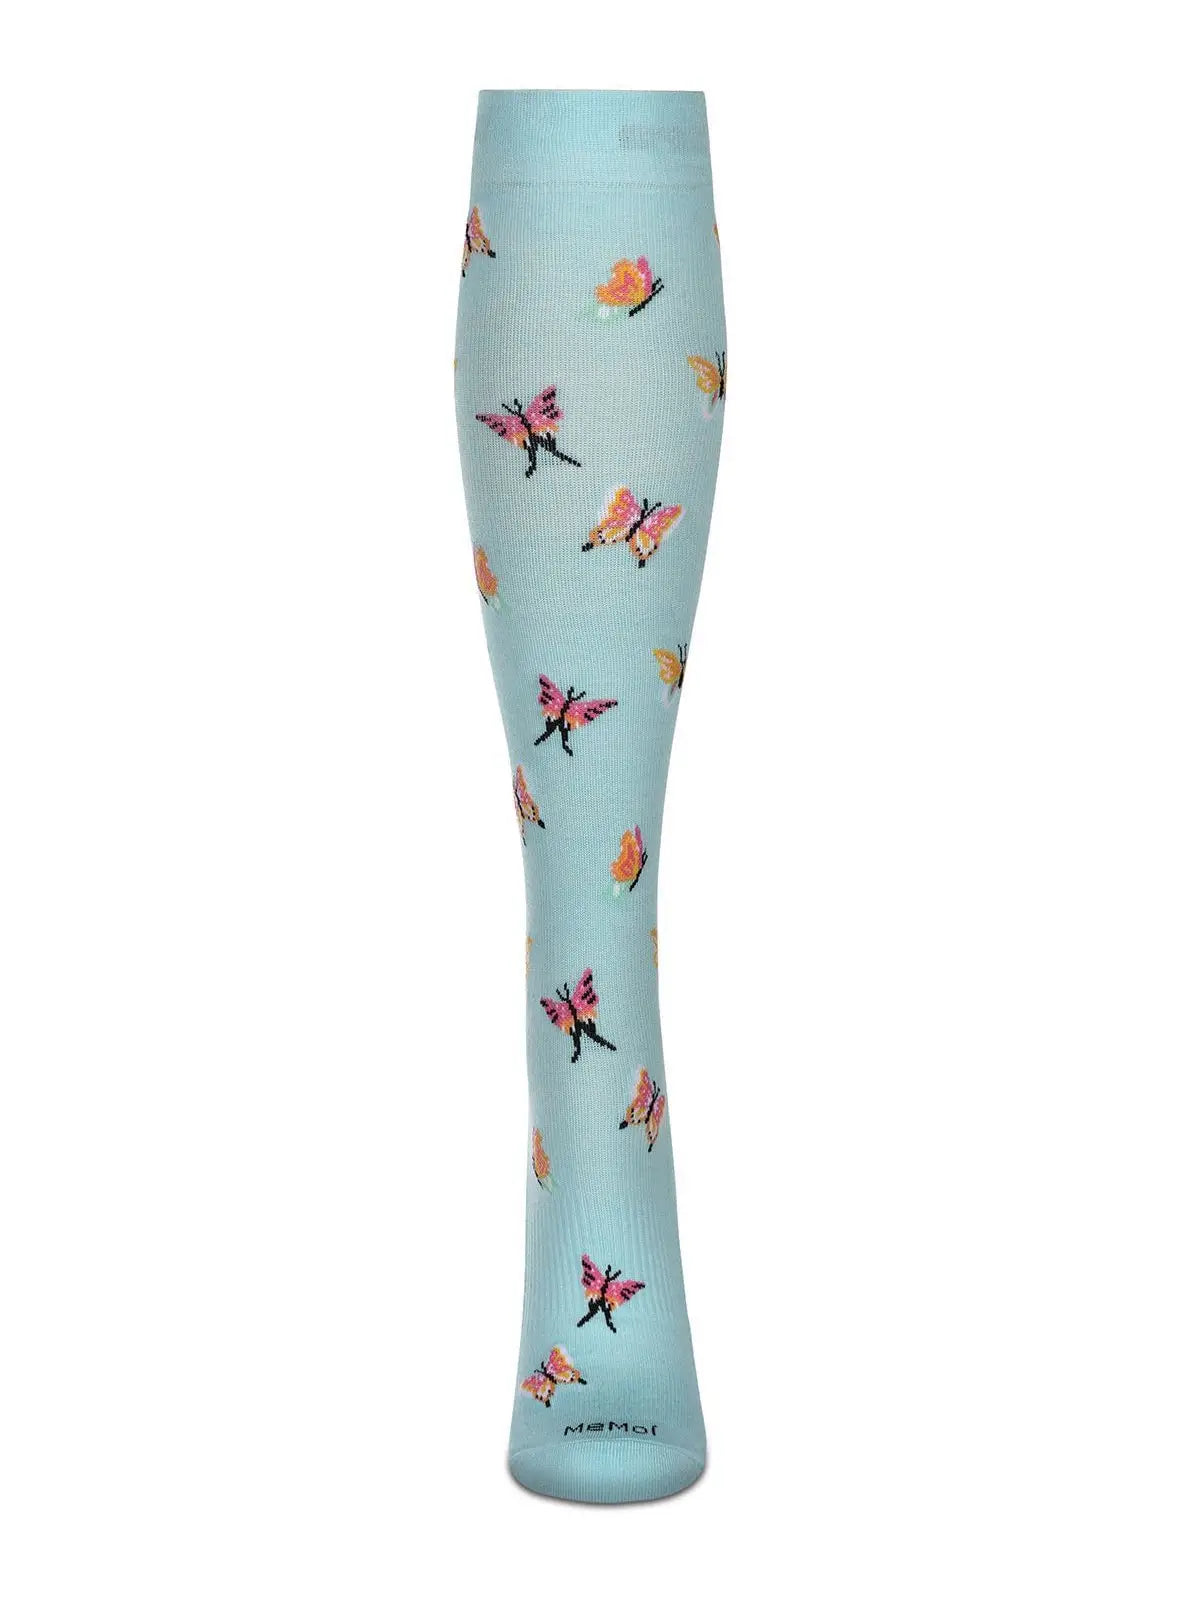 Butterfly Women's Bamboo Compression Socks - The Sockery